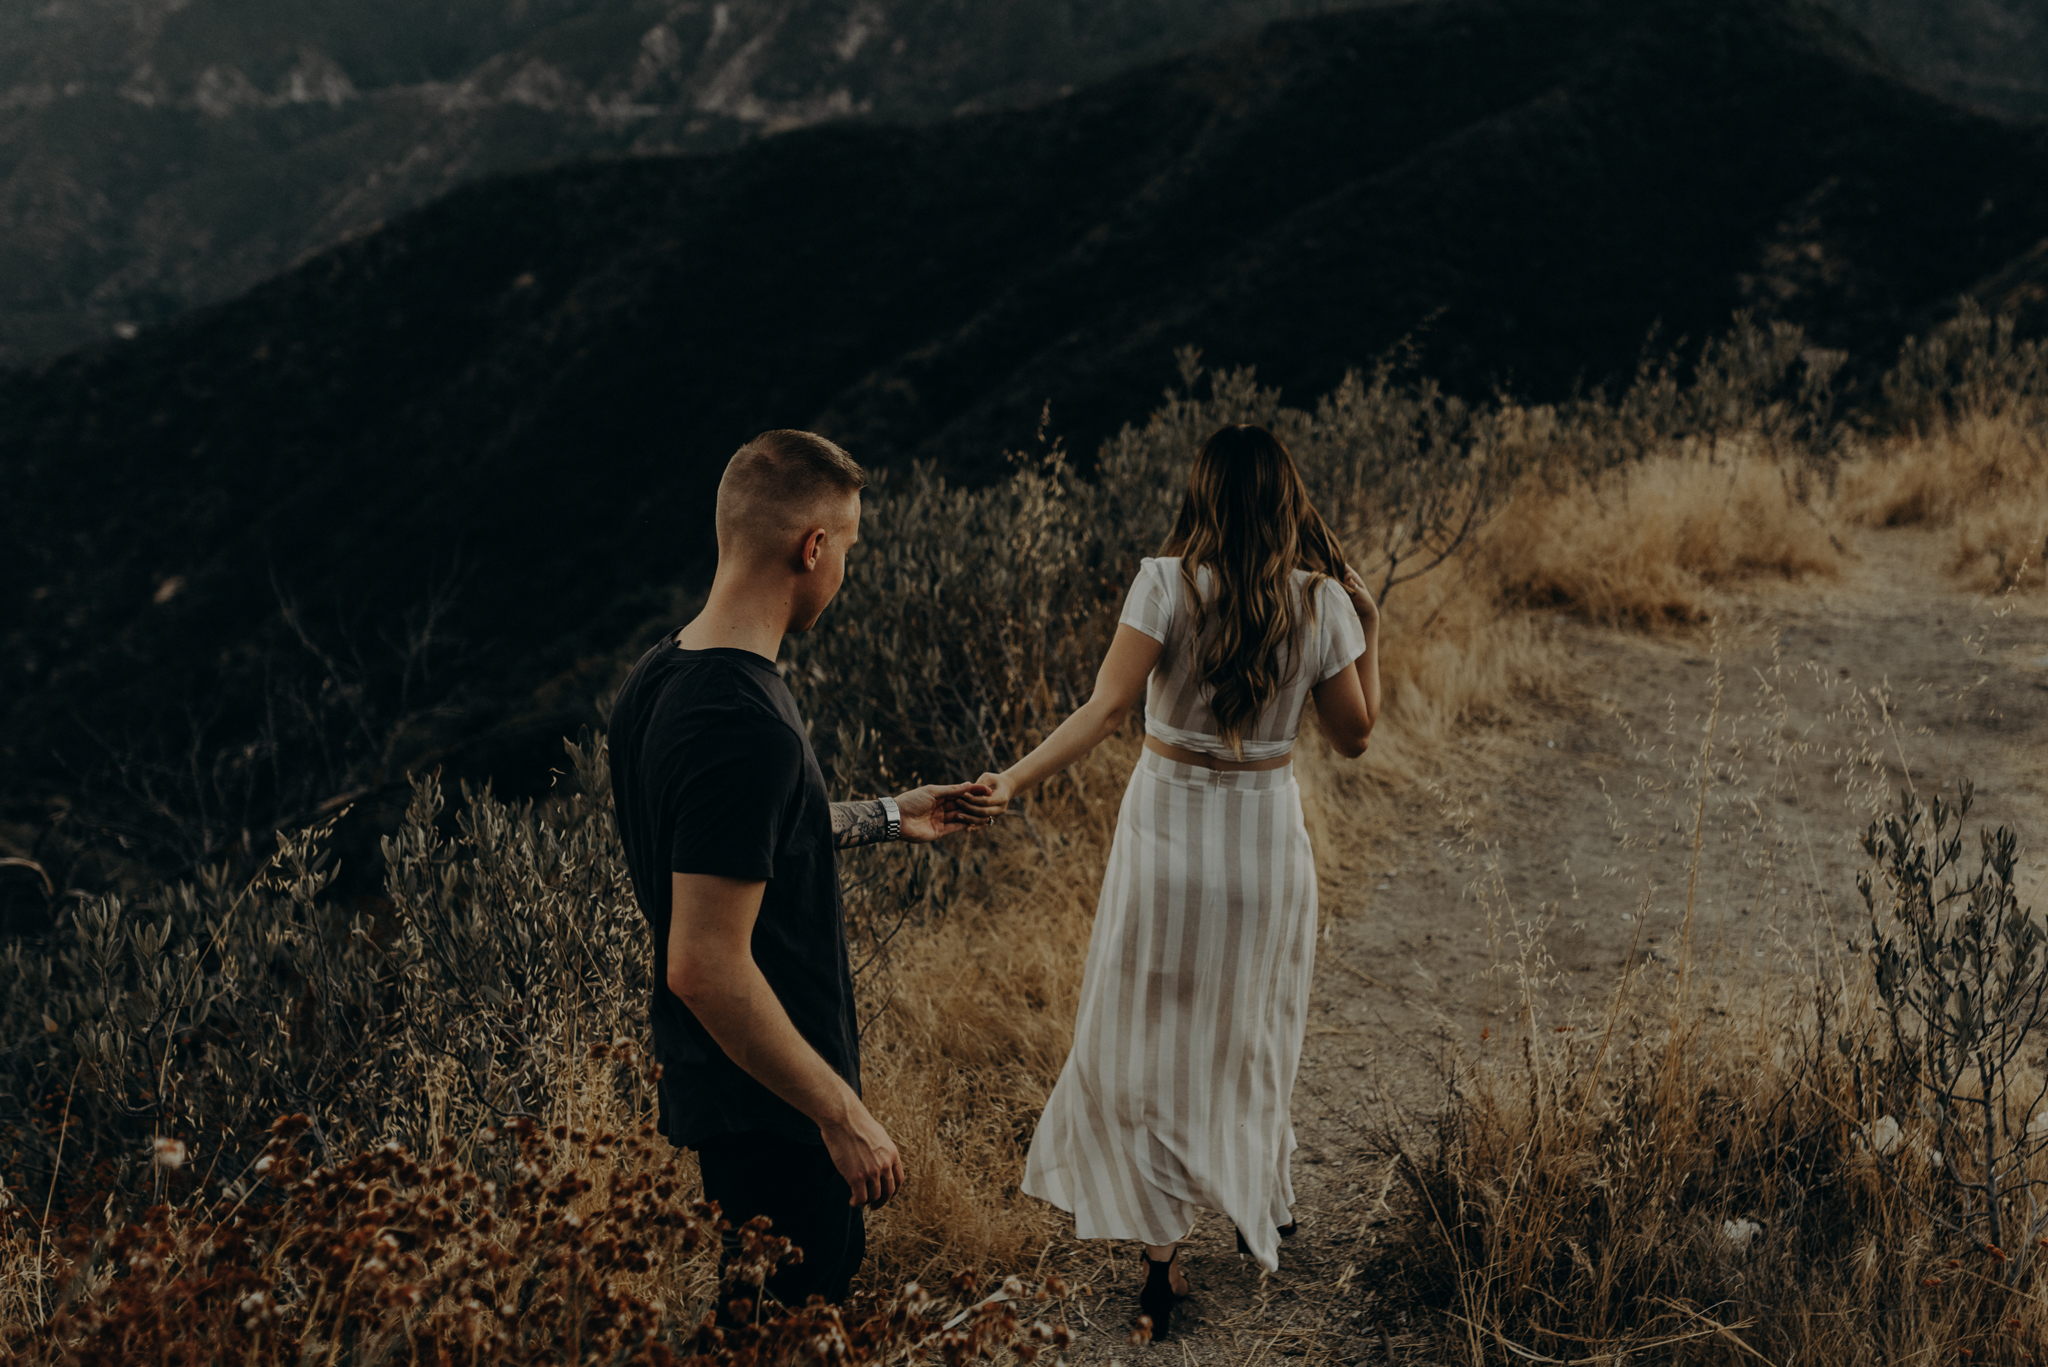 Isaiah + Taylor Photography - Los Angeles Forest Engagement Session - Laid back wedding photographer-018.jpg